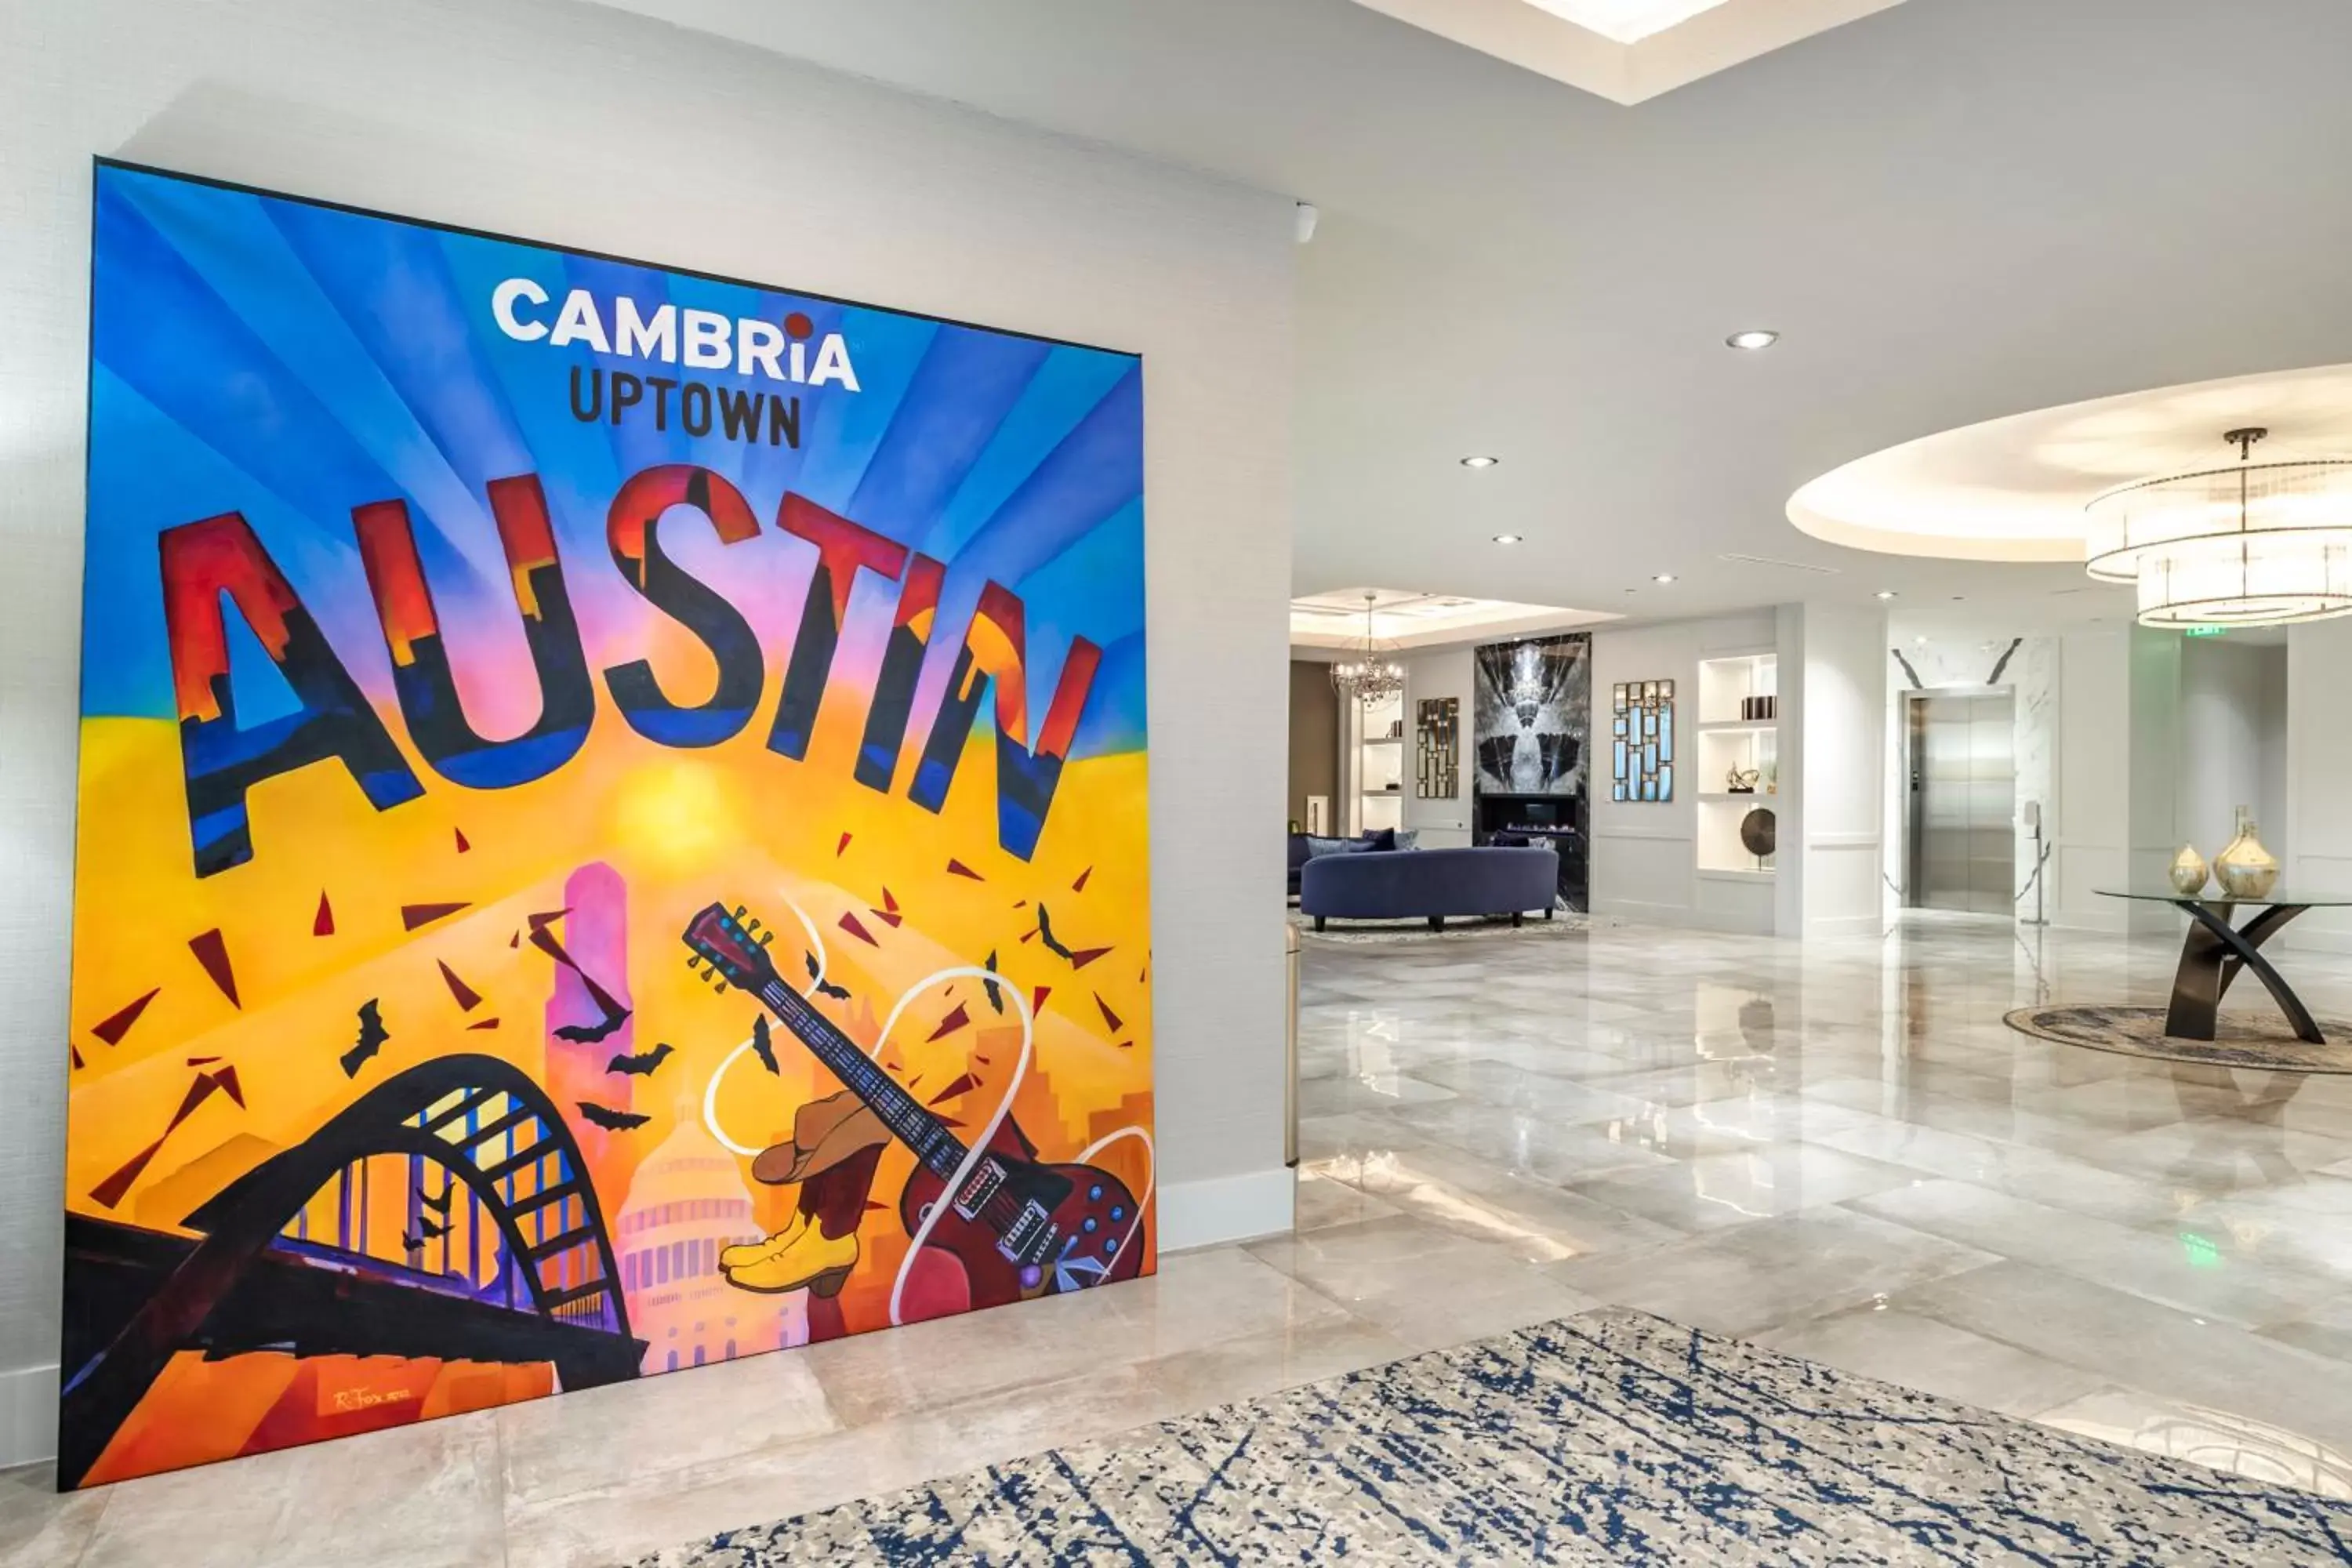 Lobby or reception in Cambria Hotel Austin Uptown near the Domain